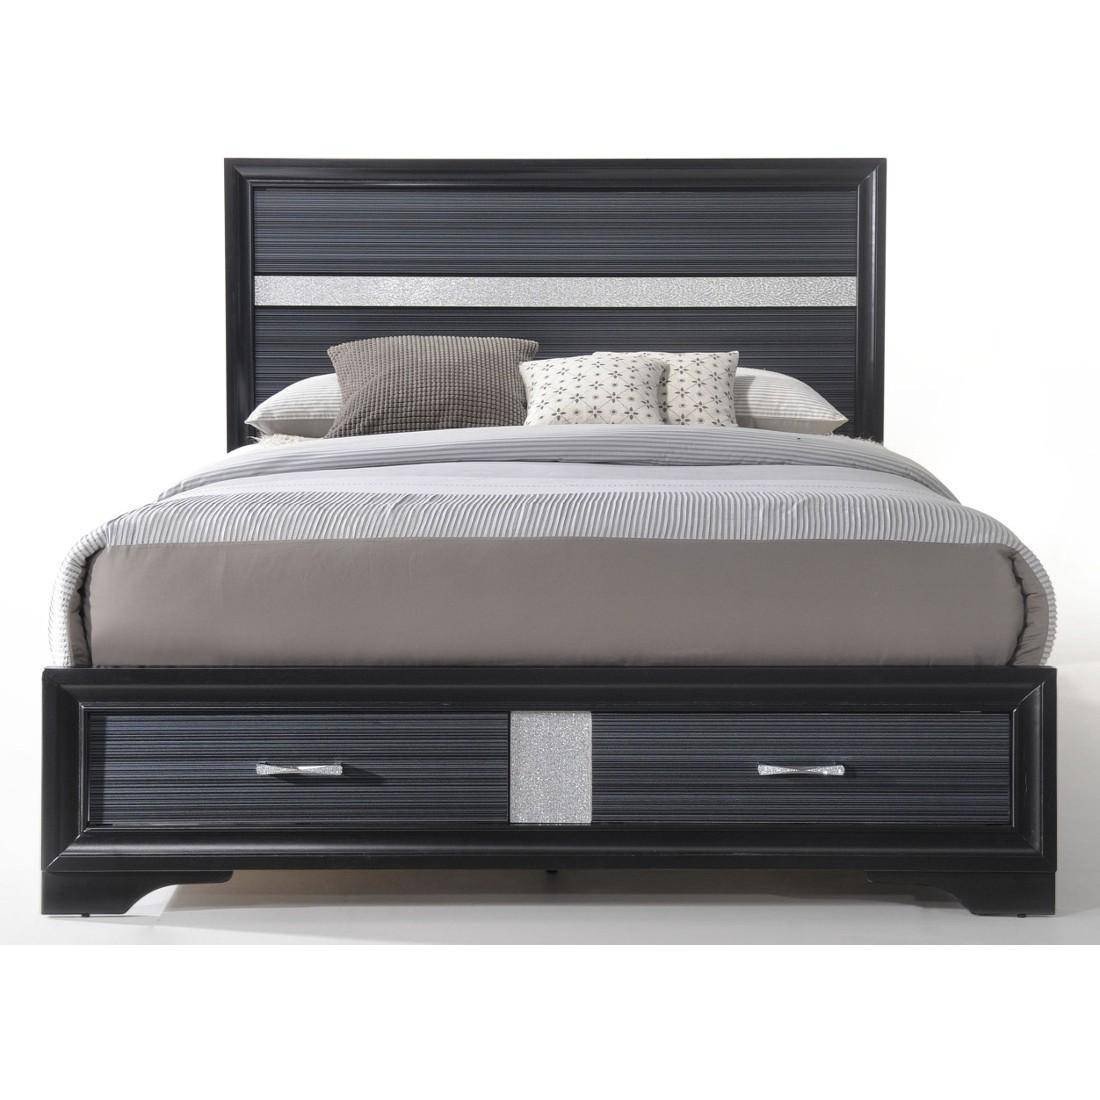 Bedroom with Black Furniture Awesome Black Wood Queen Storage Bedroom Set 4pcs Naima Q Acme